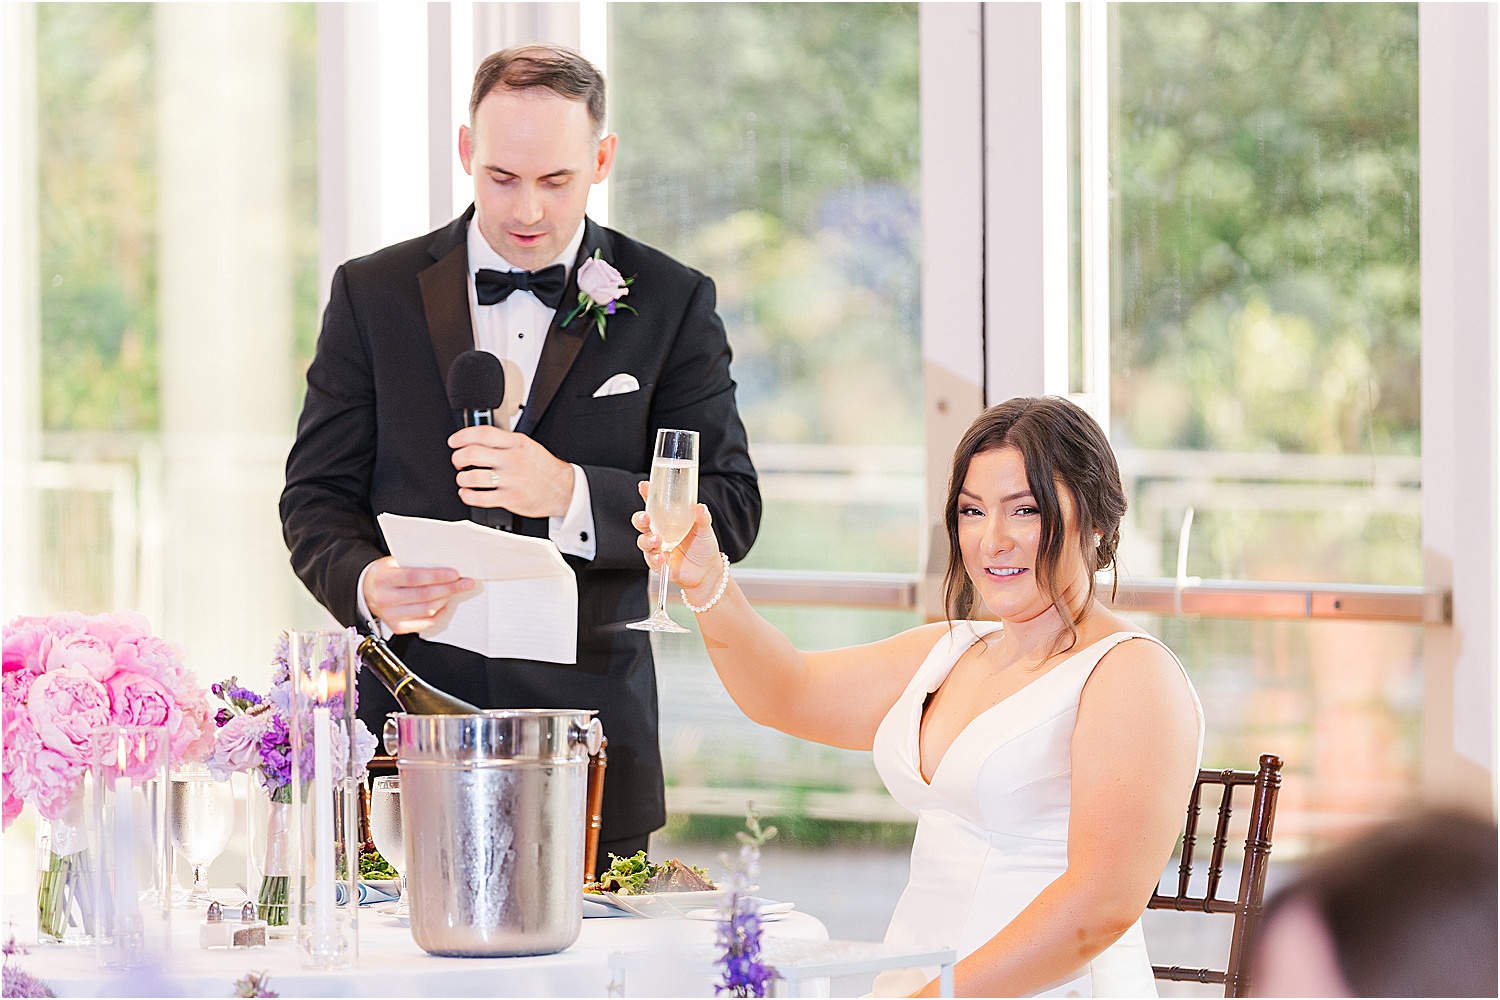 Groom giving toast at wedding • Wild Weather - Love at a Phipps Conservatory Outdoor Garden Wedding